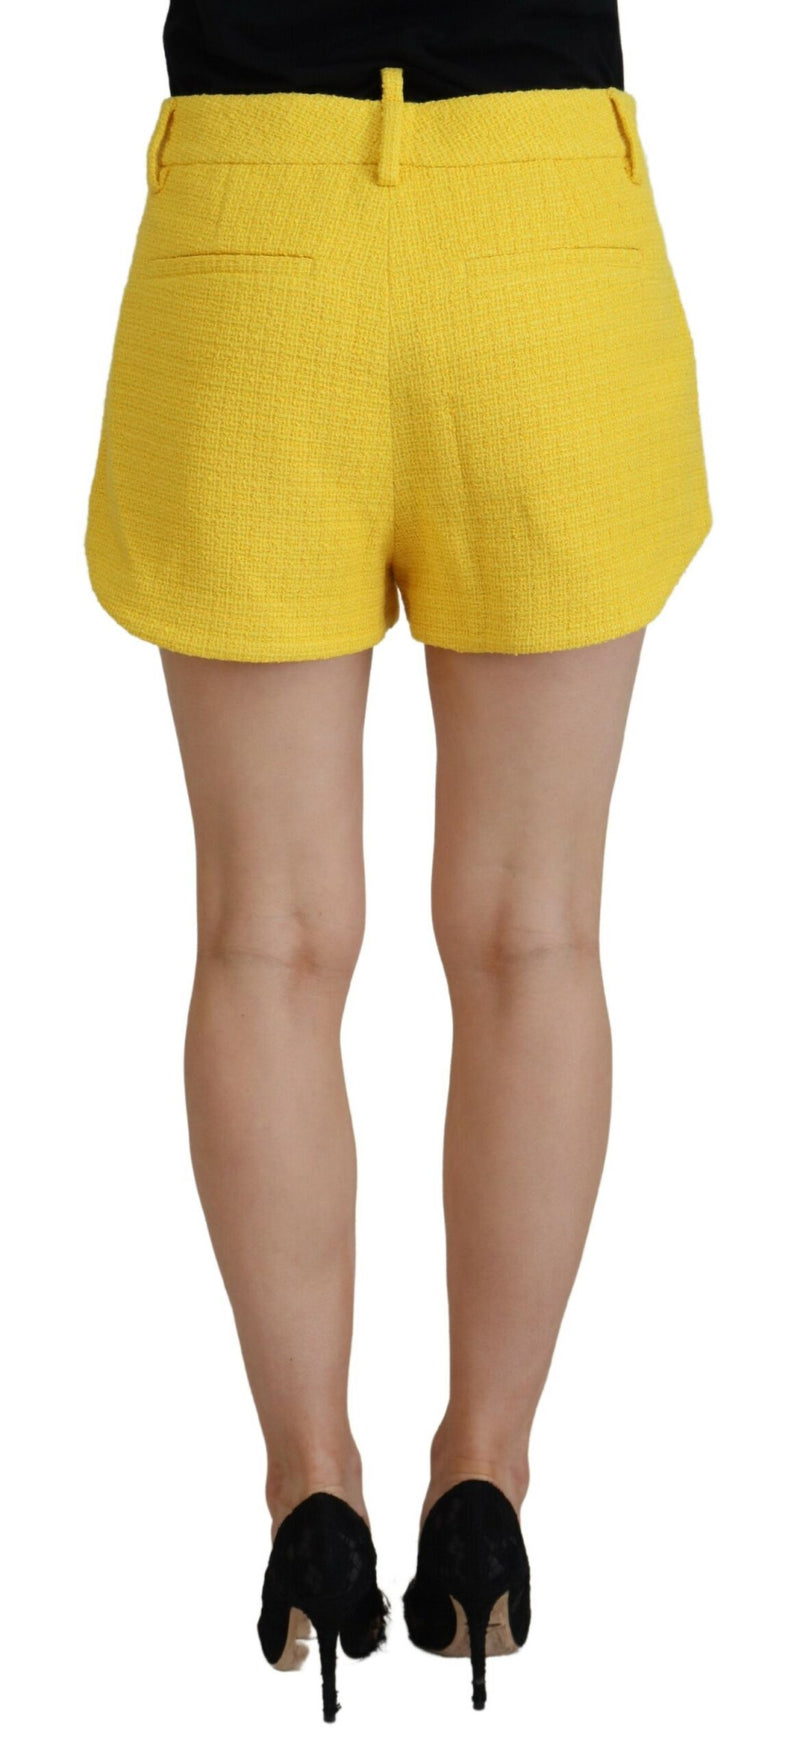 Dsquared² Yellow Peak Double Breasted Suit Blazer Short Set